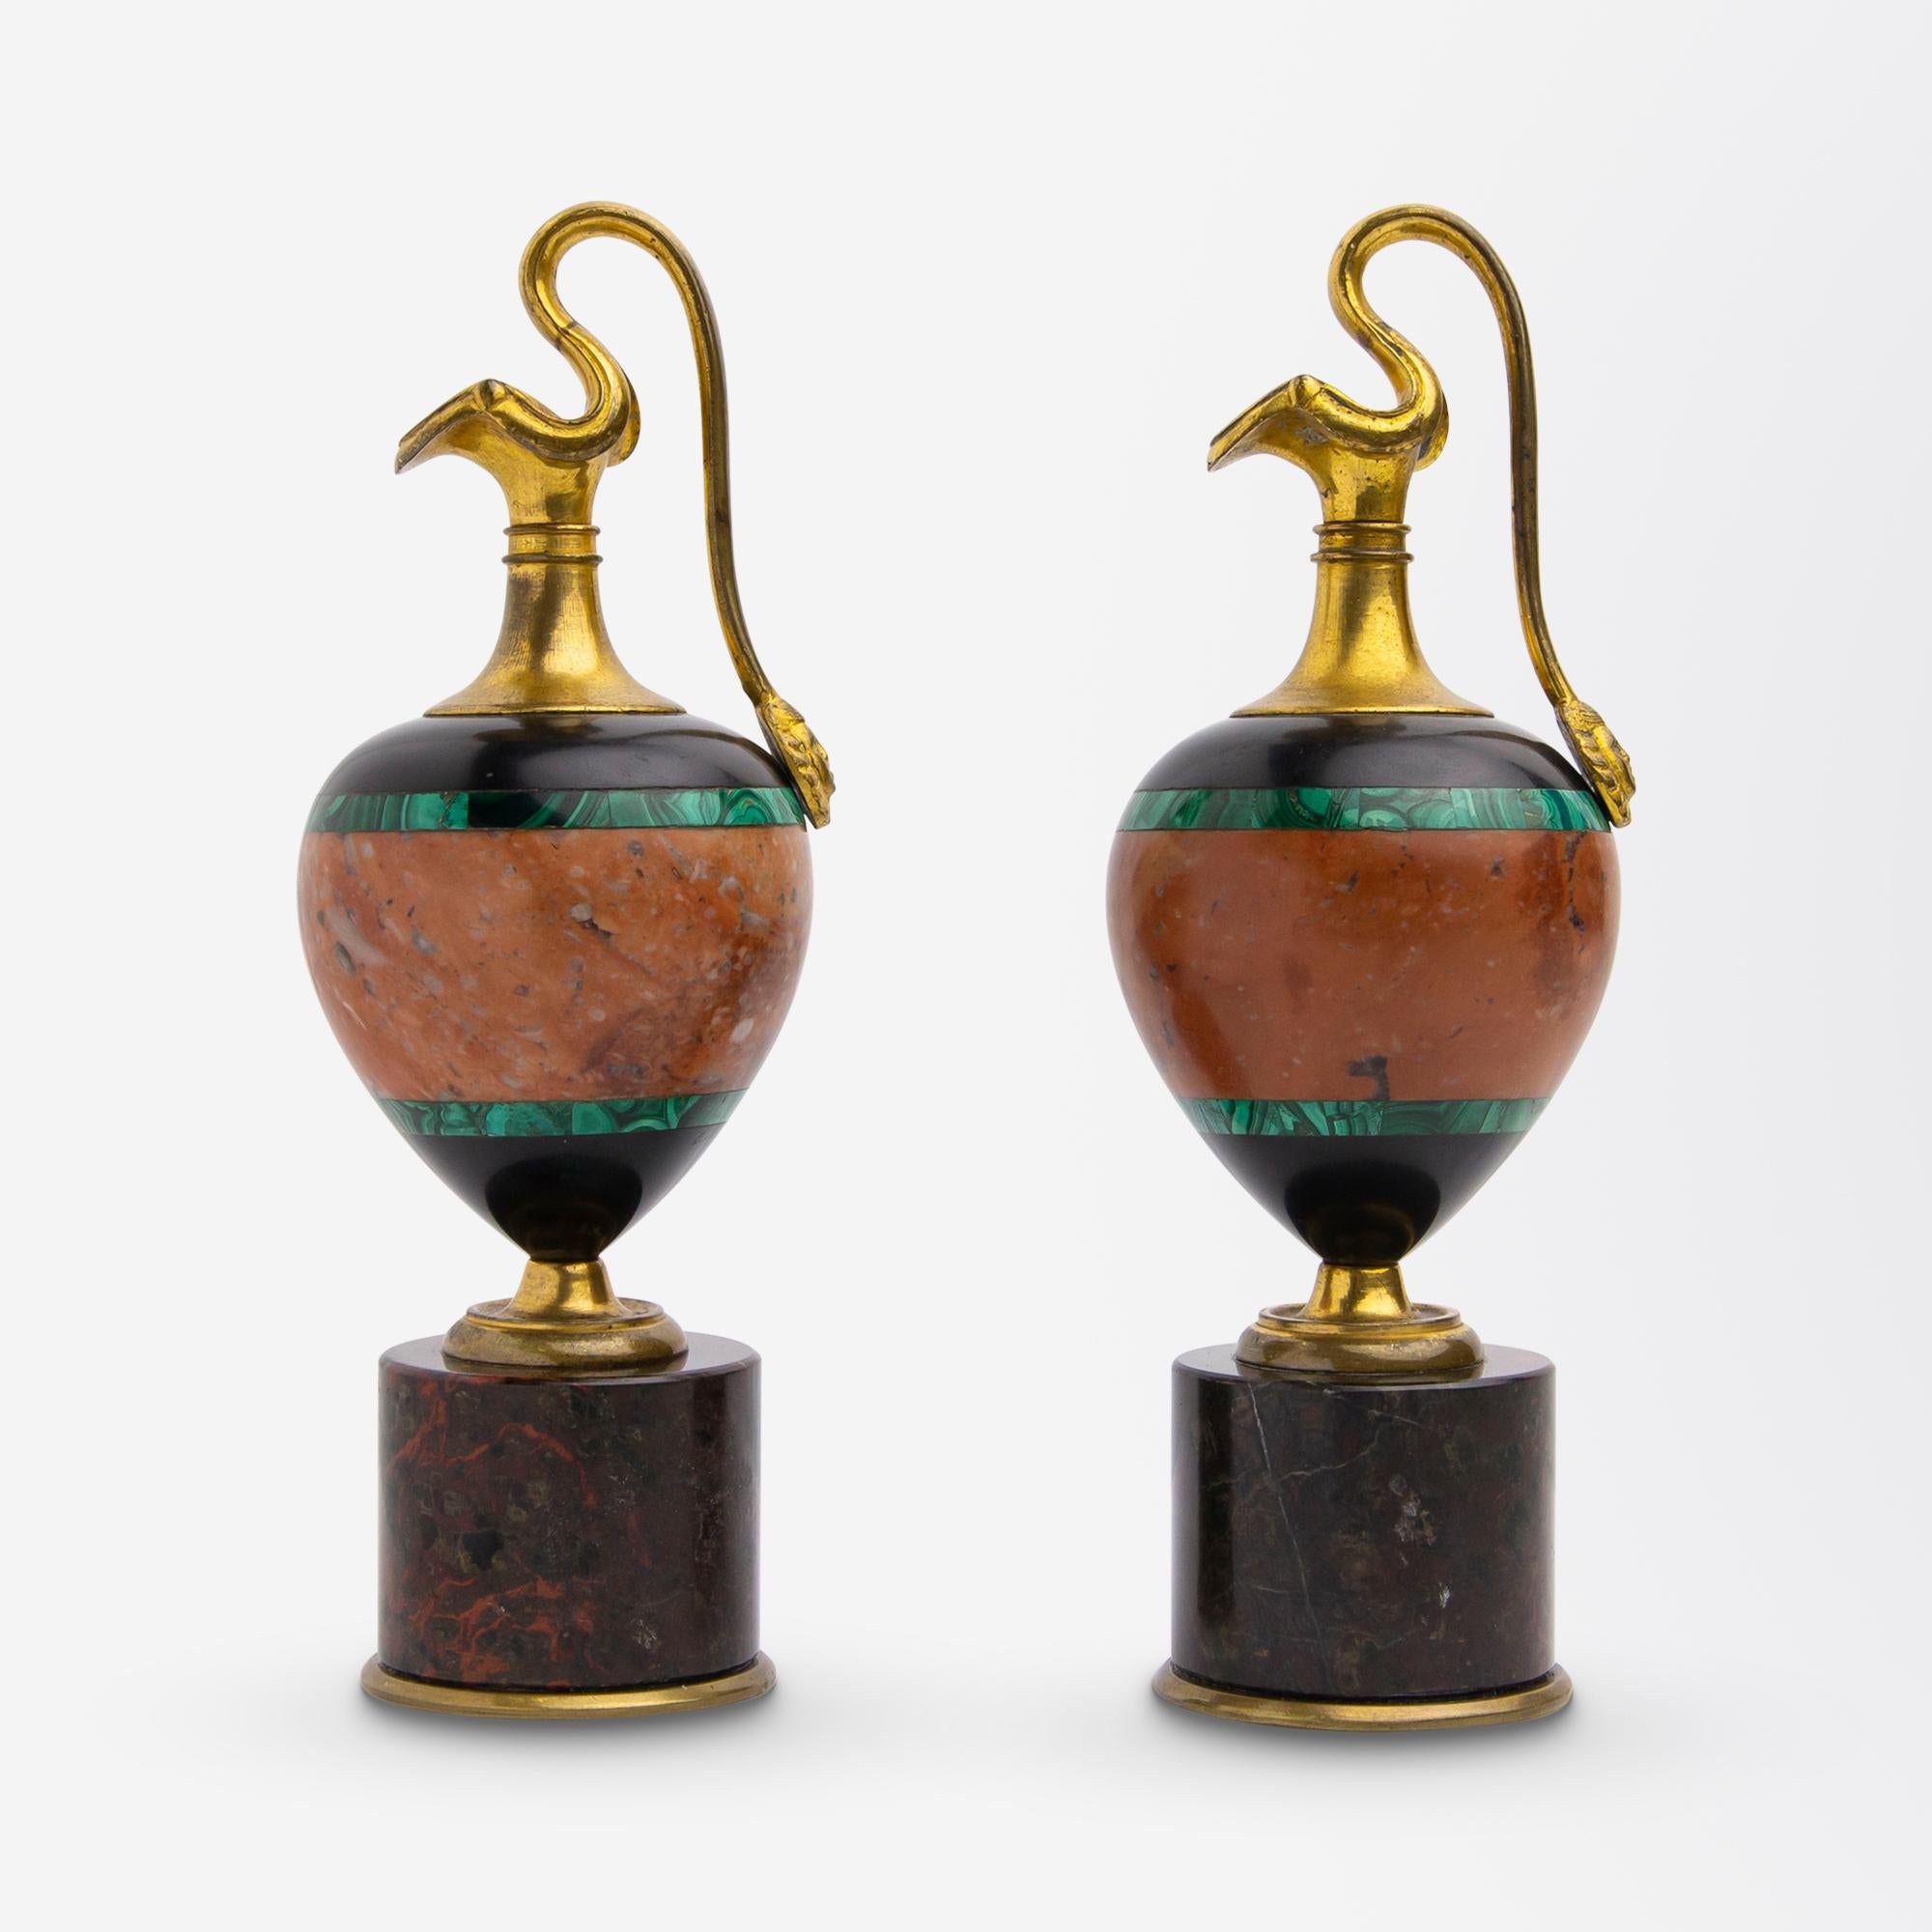 This pair of Grand Tour era ewers are in the 'oinochoe' shape and date to circa 1870. The pair are miniature in size and comprise of ormolu (gilt bronze), malachite, onyx and hardstone. The pair are ornamental and not intended for use, being just 14